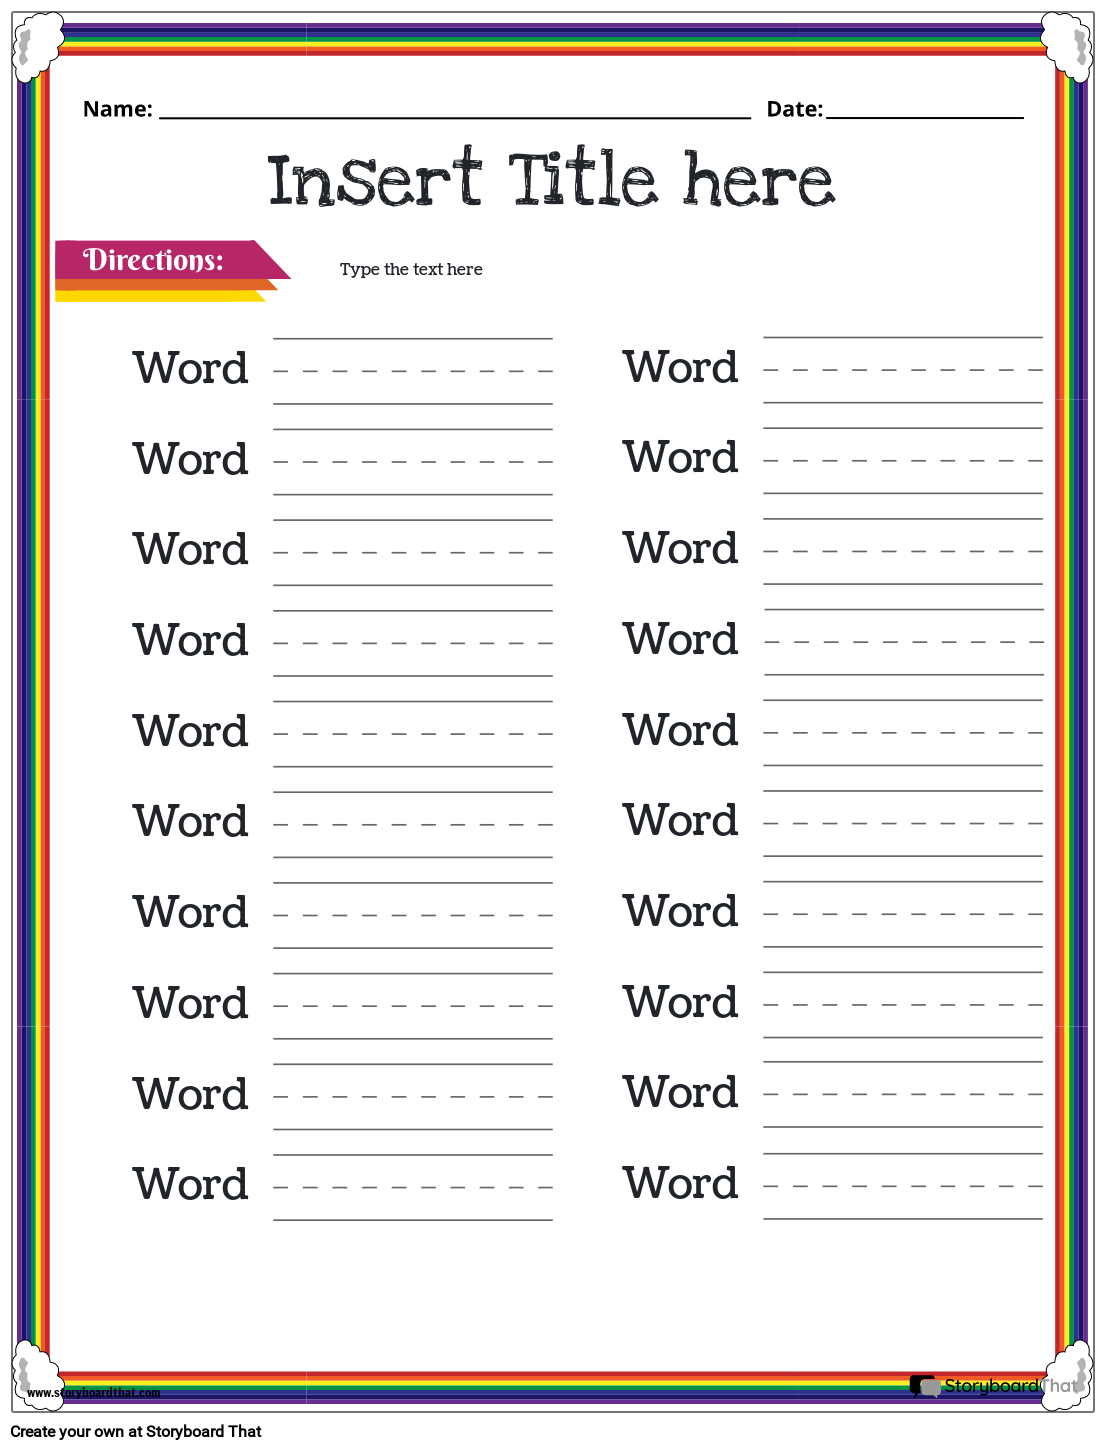 free-compound-words-for-kids-worksheets-printable-templates